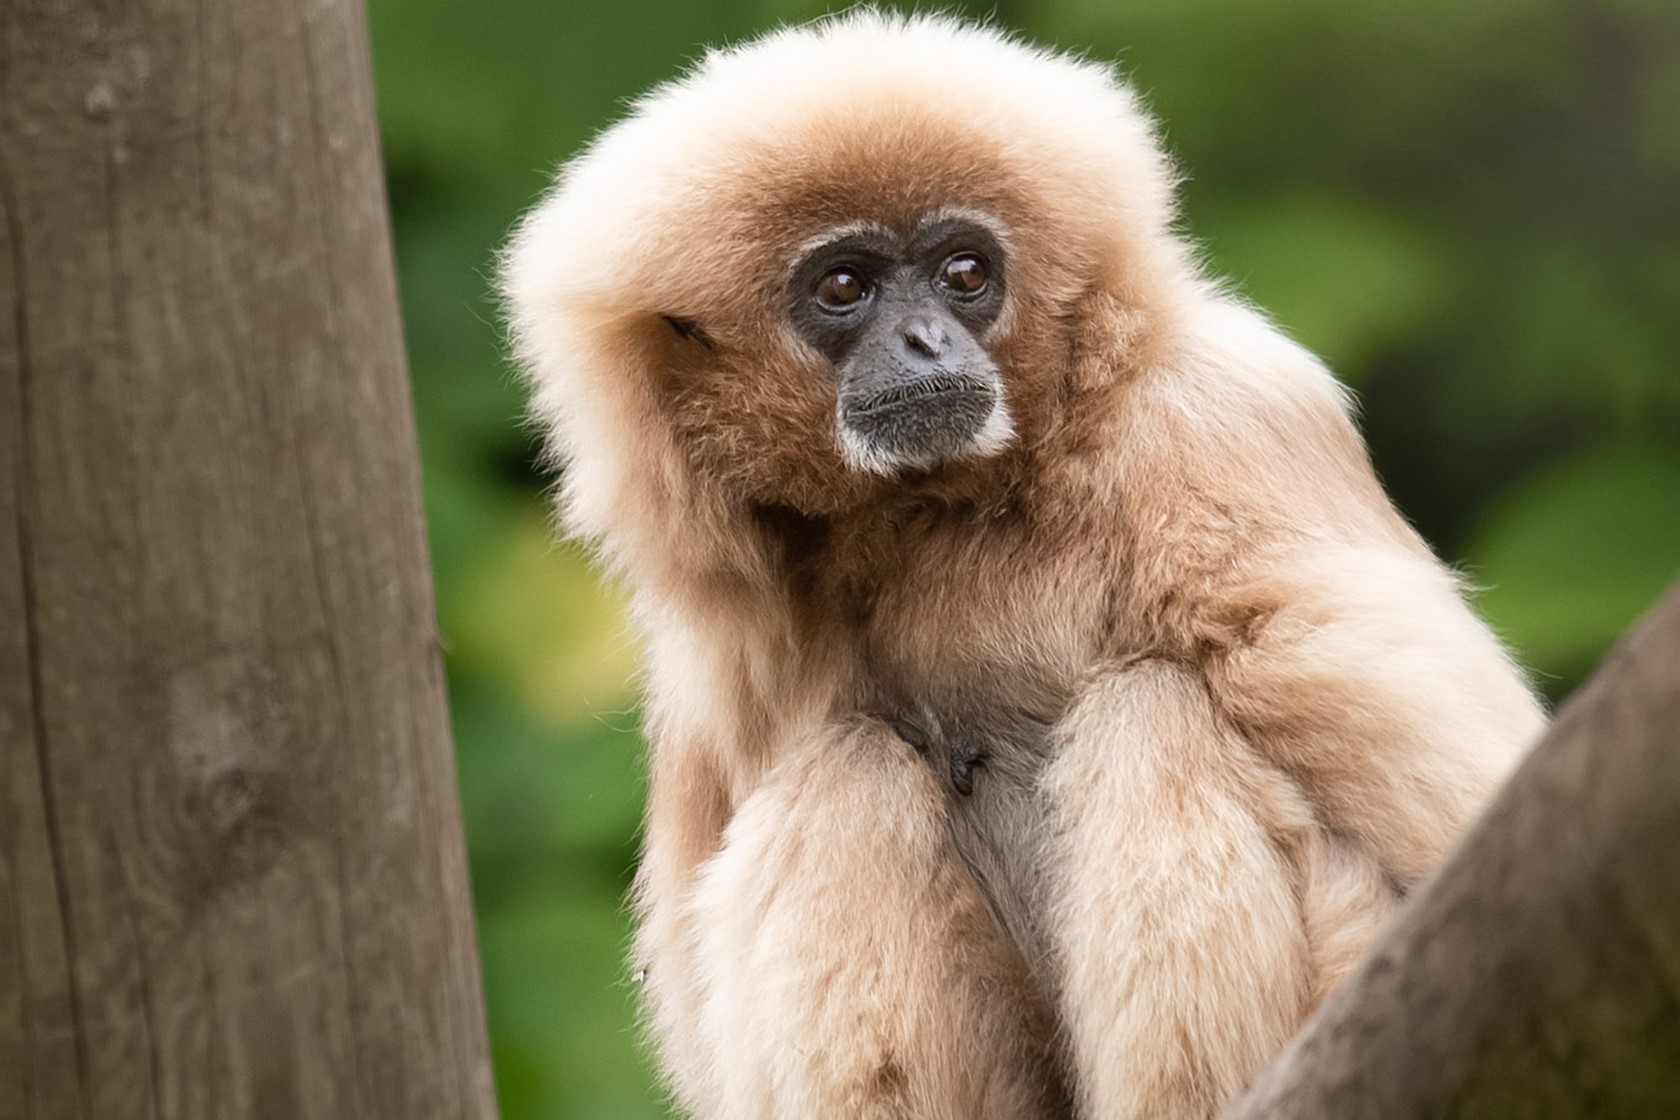 A white-handed gibbon perched on a log at Jersey Zoo